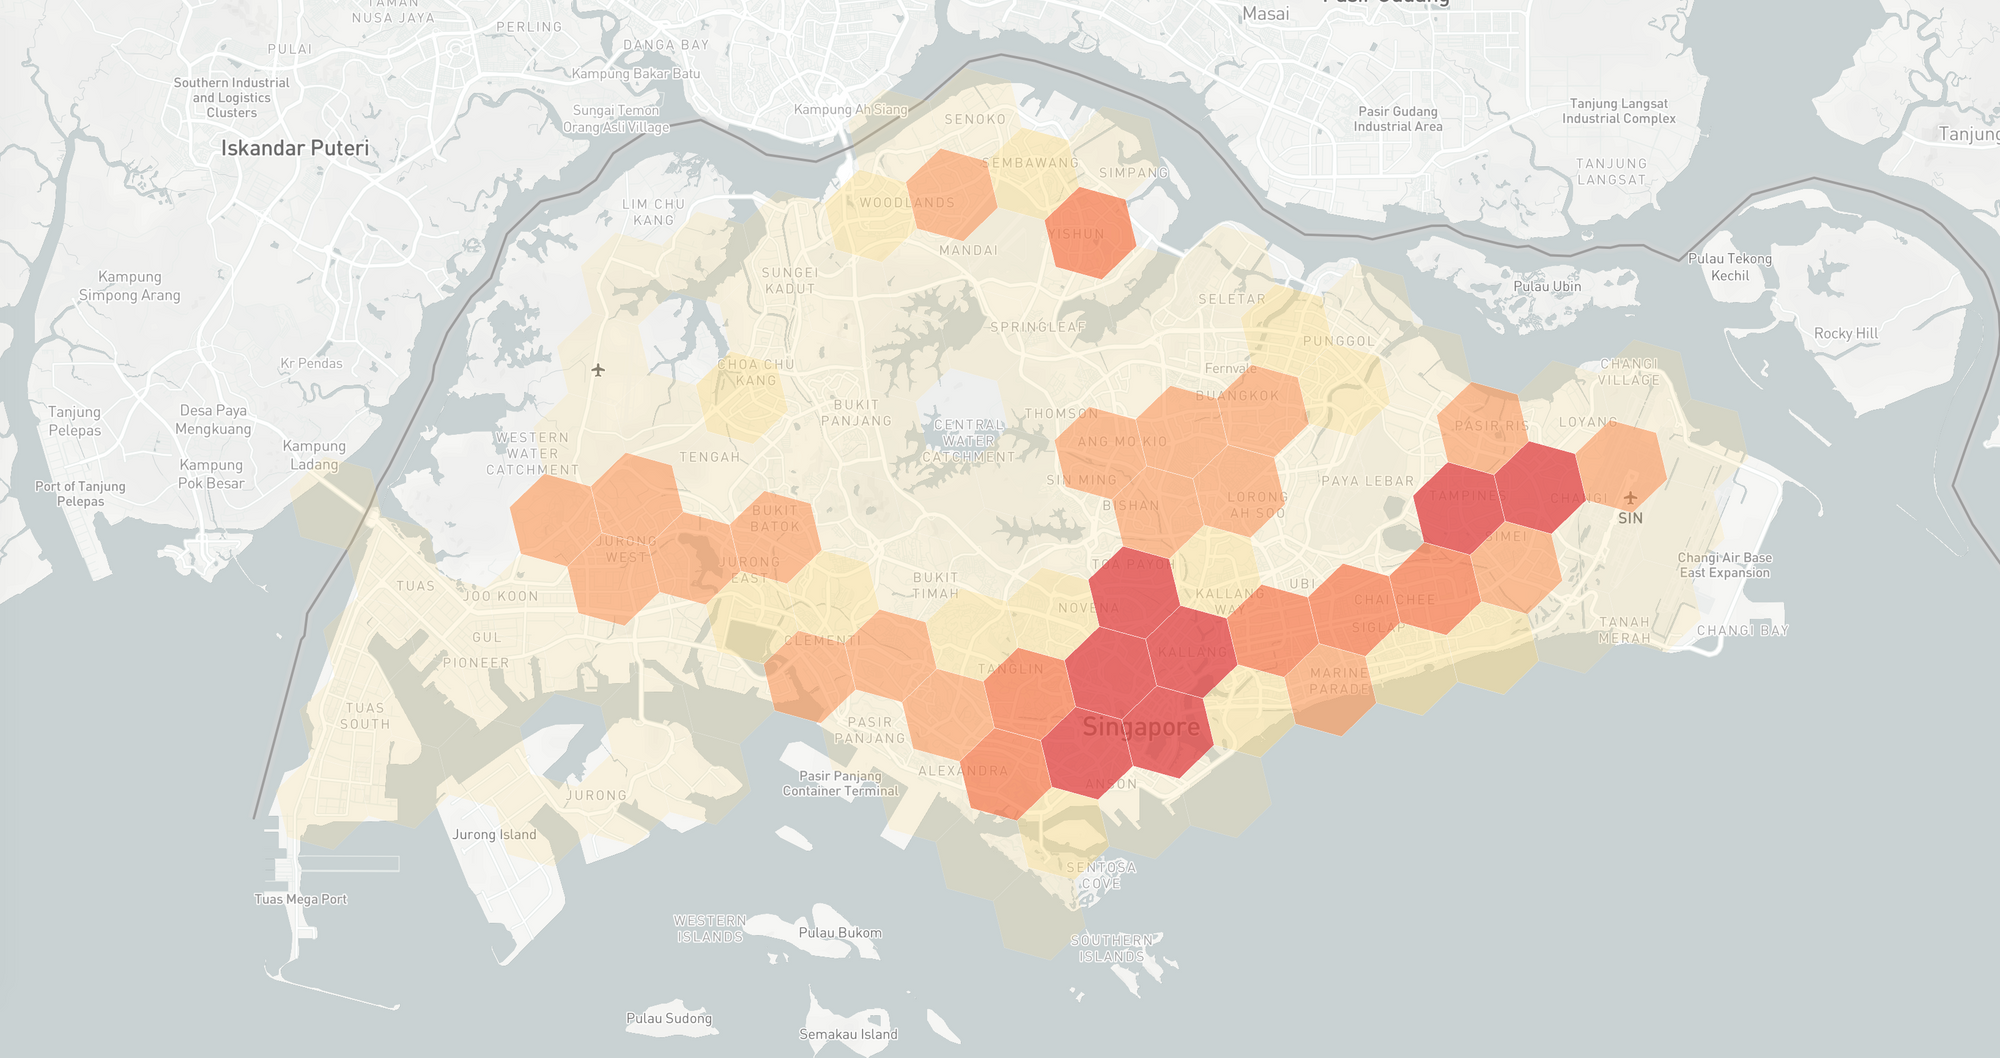 Taxi demand in Singapore visualized using the Uber h3-js library and h3 map